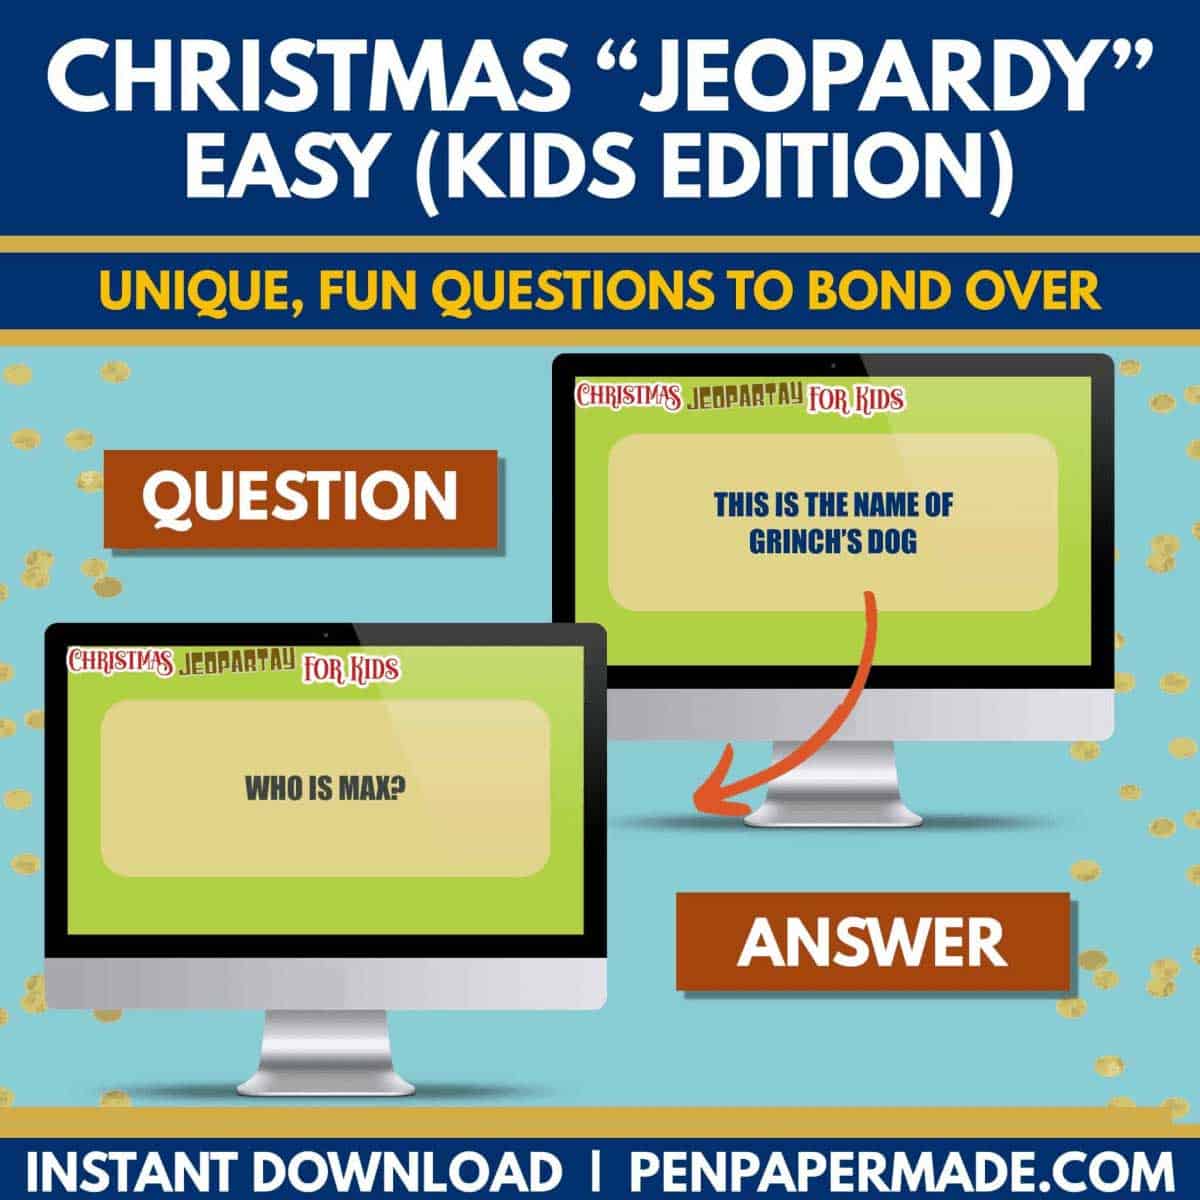 fun christmas jeopardy for kids questions like what is the name of grinch's dog?